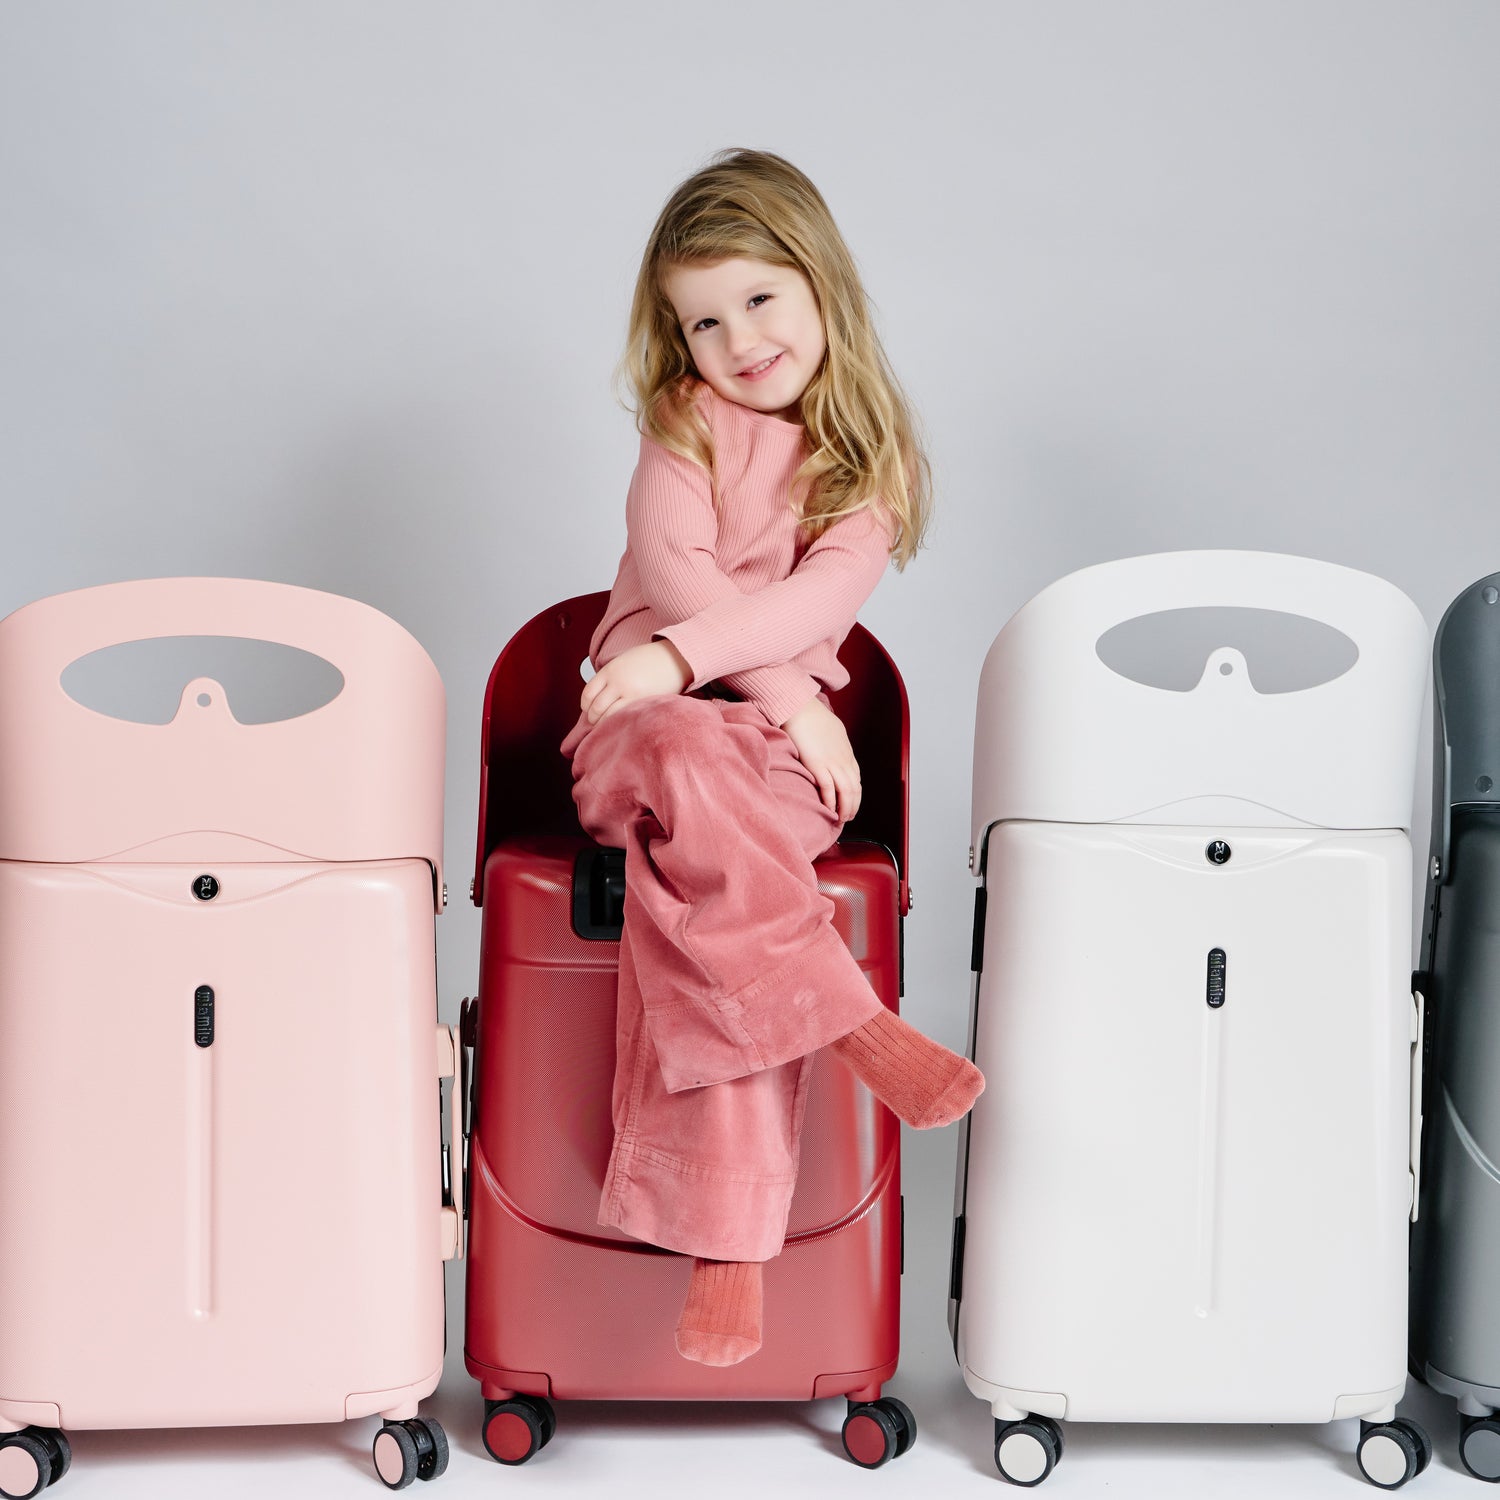 Little girl sits on a carry-on luggage